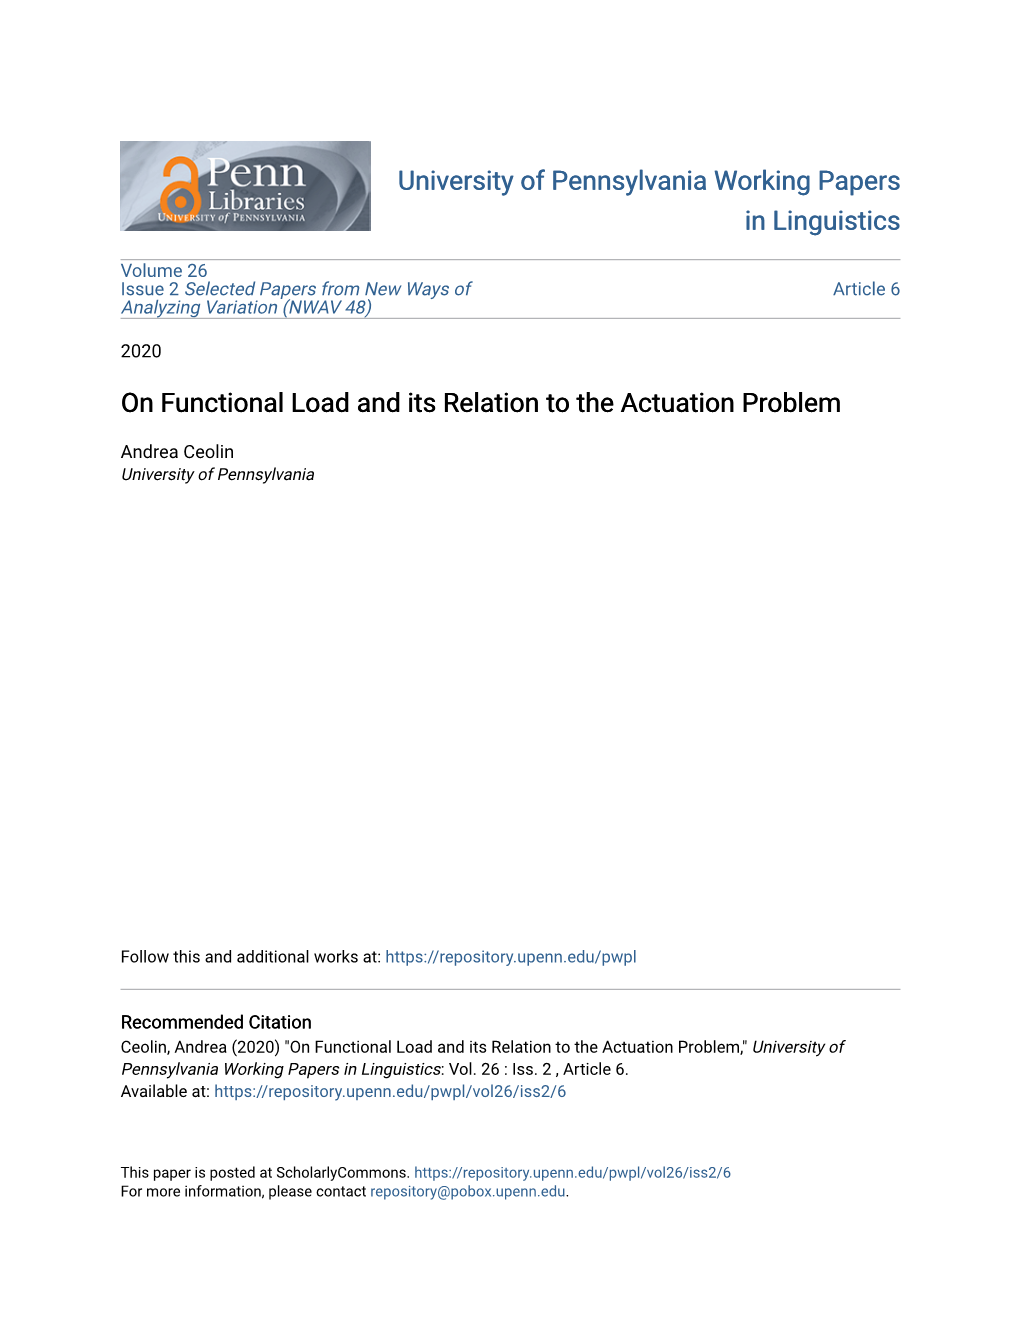 On Functional Load and Its Relation to the Actuation Problem